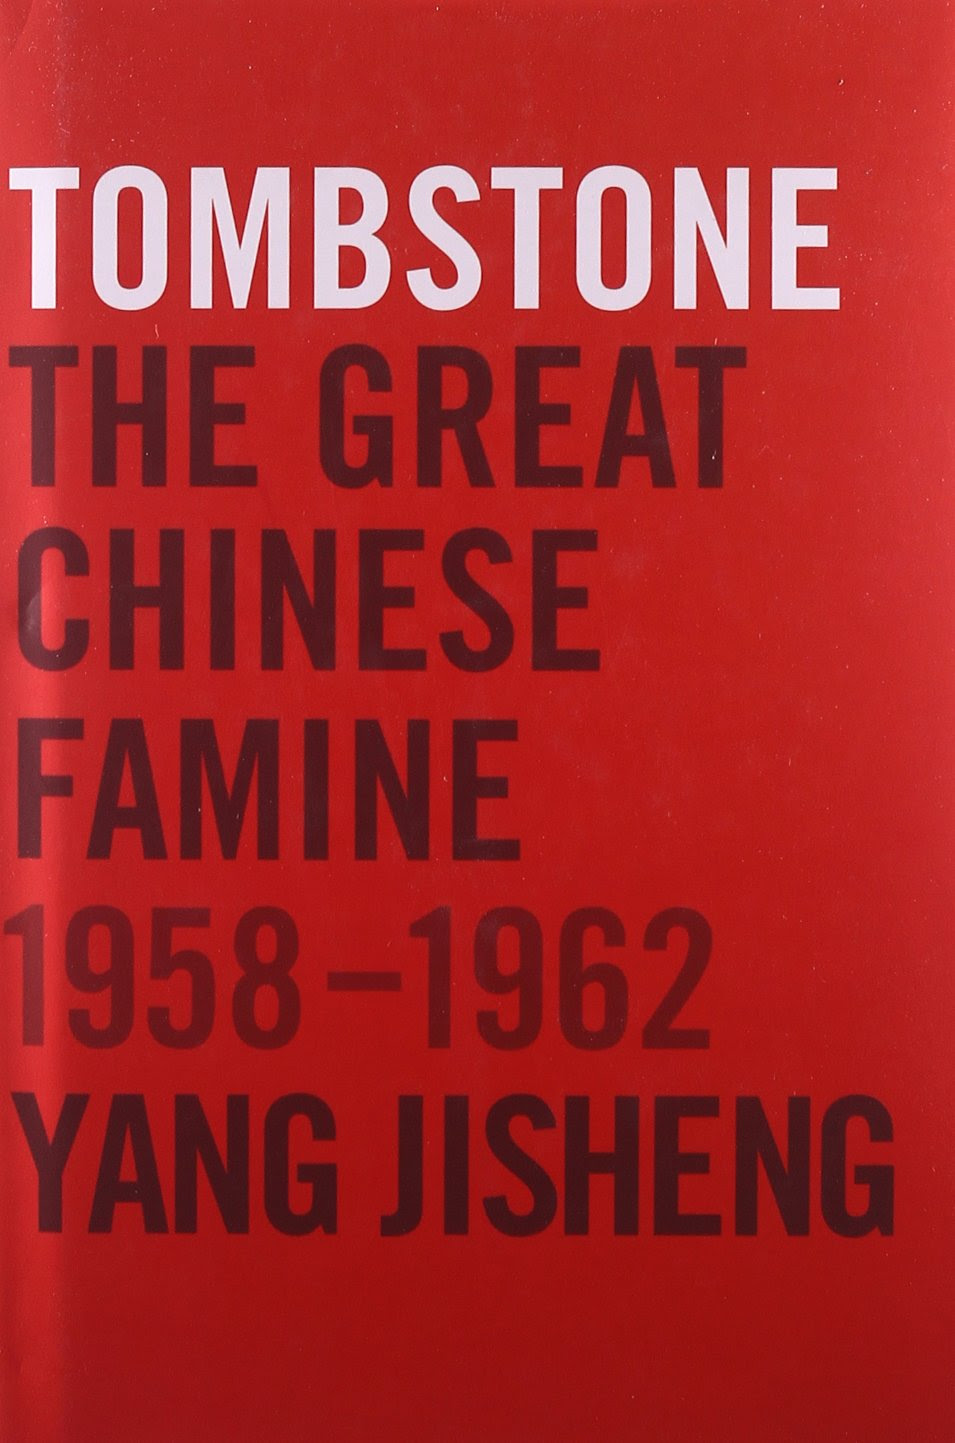 http://www.amazon.com/Tombstone-Great-Chinese-Famine-1958-1962/dp/0374277931